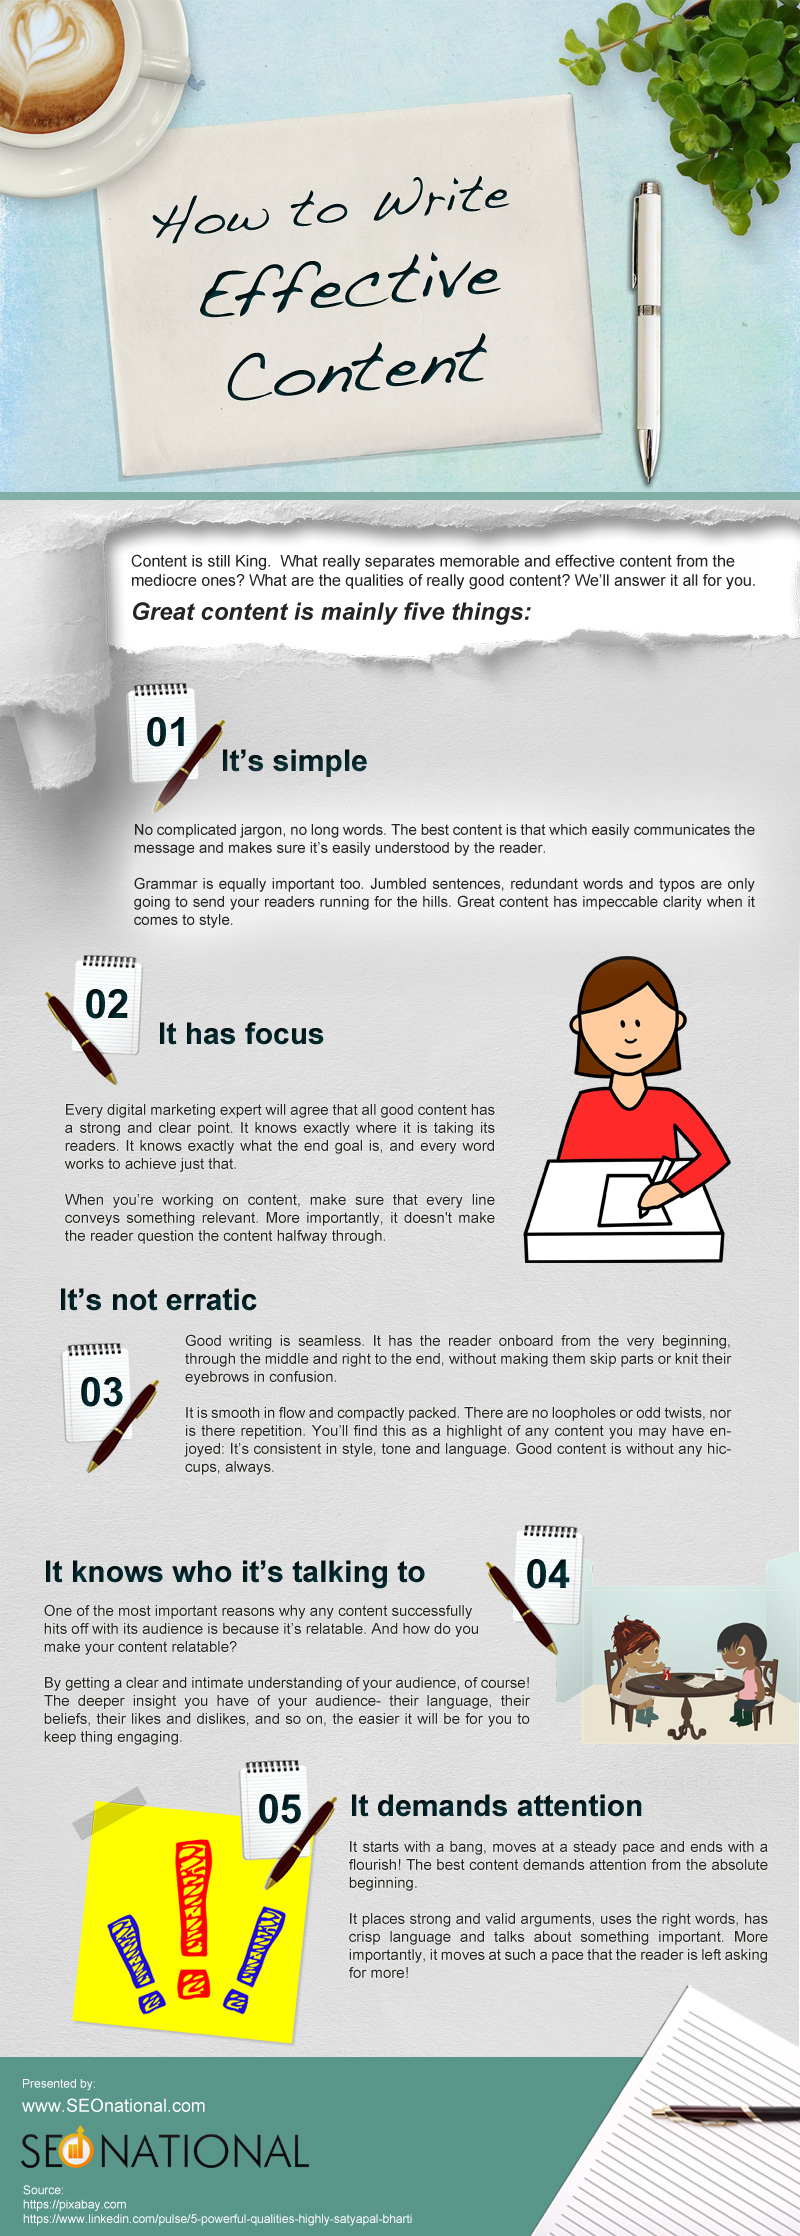 how to write effective content